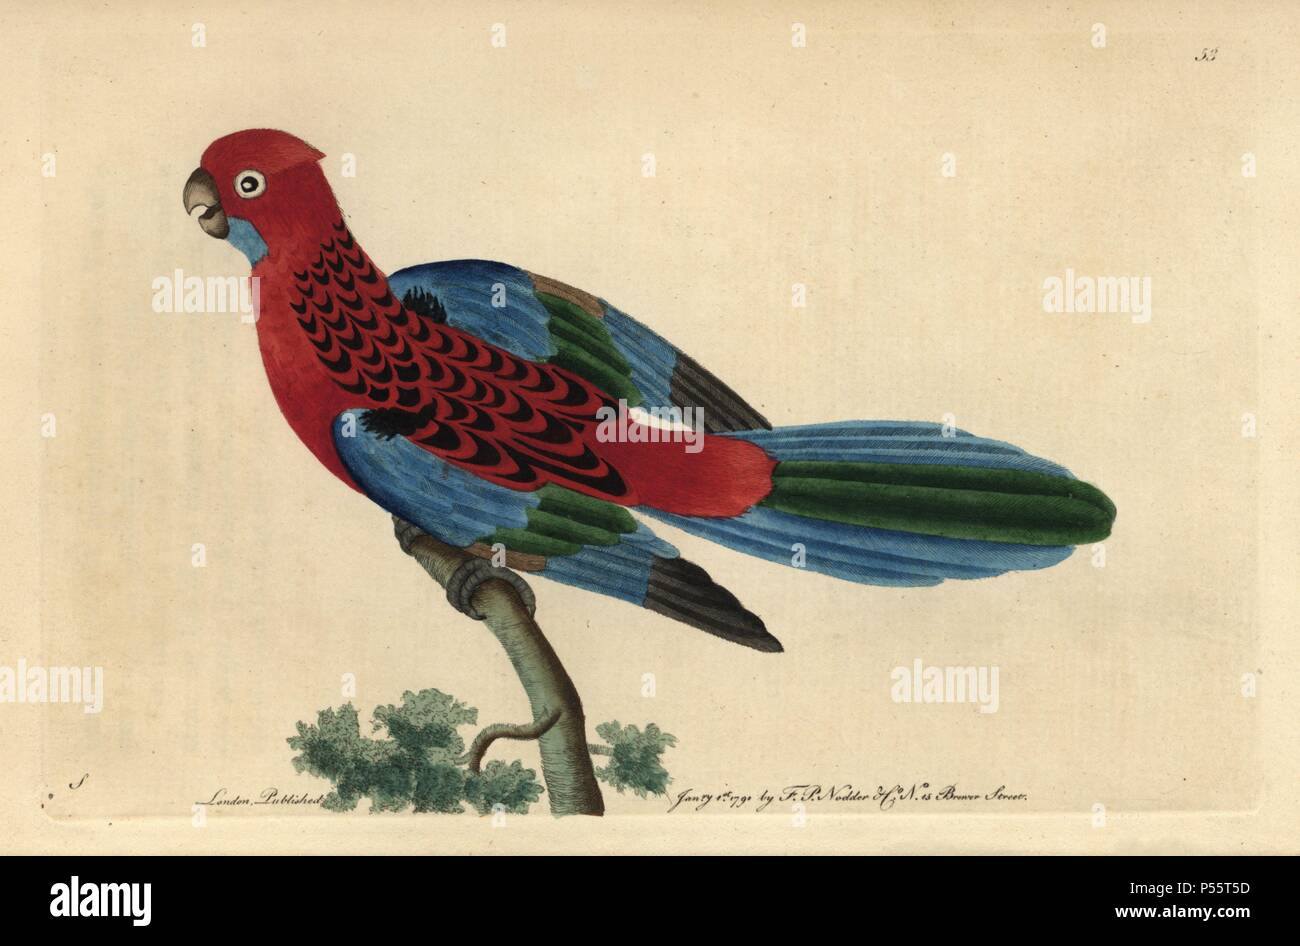 Splendid parrot or Crimson Rosella . Platycercus elegans (Psittacus gloriosus, P. splendidus). Australian parrot with vivid crimson and blue plumage.. Illustration signed S (George Shaw).. Handcolored copperplate engraving from George Shaw and Frederick Nodder's 'The Naturalist's Miscellany' 1790.. Frederick Polydore Nodder (17511801?) was a gifted natural history artist and engraver. Nodder honed his draftsmanship working on Captain Cook and Joseph Banks' Florilegium and engraving Sydney Parkinson's sketches of Australian plants. He was made 'botanic painter to her majesty' Queen Charlotte i Stock Photo